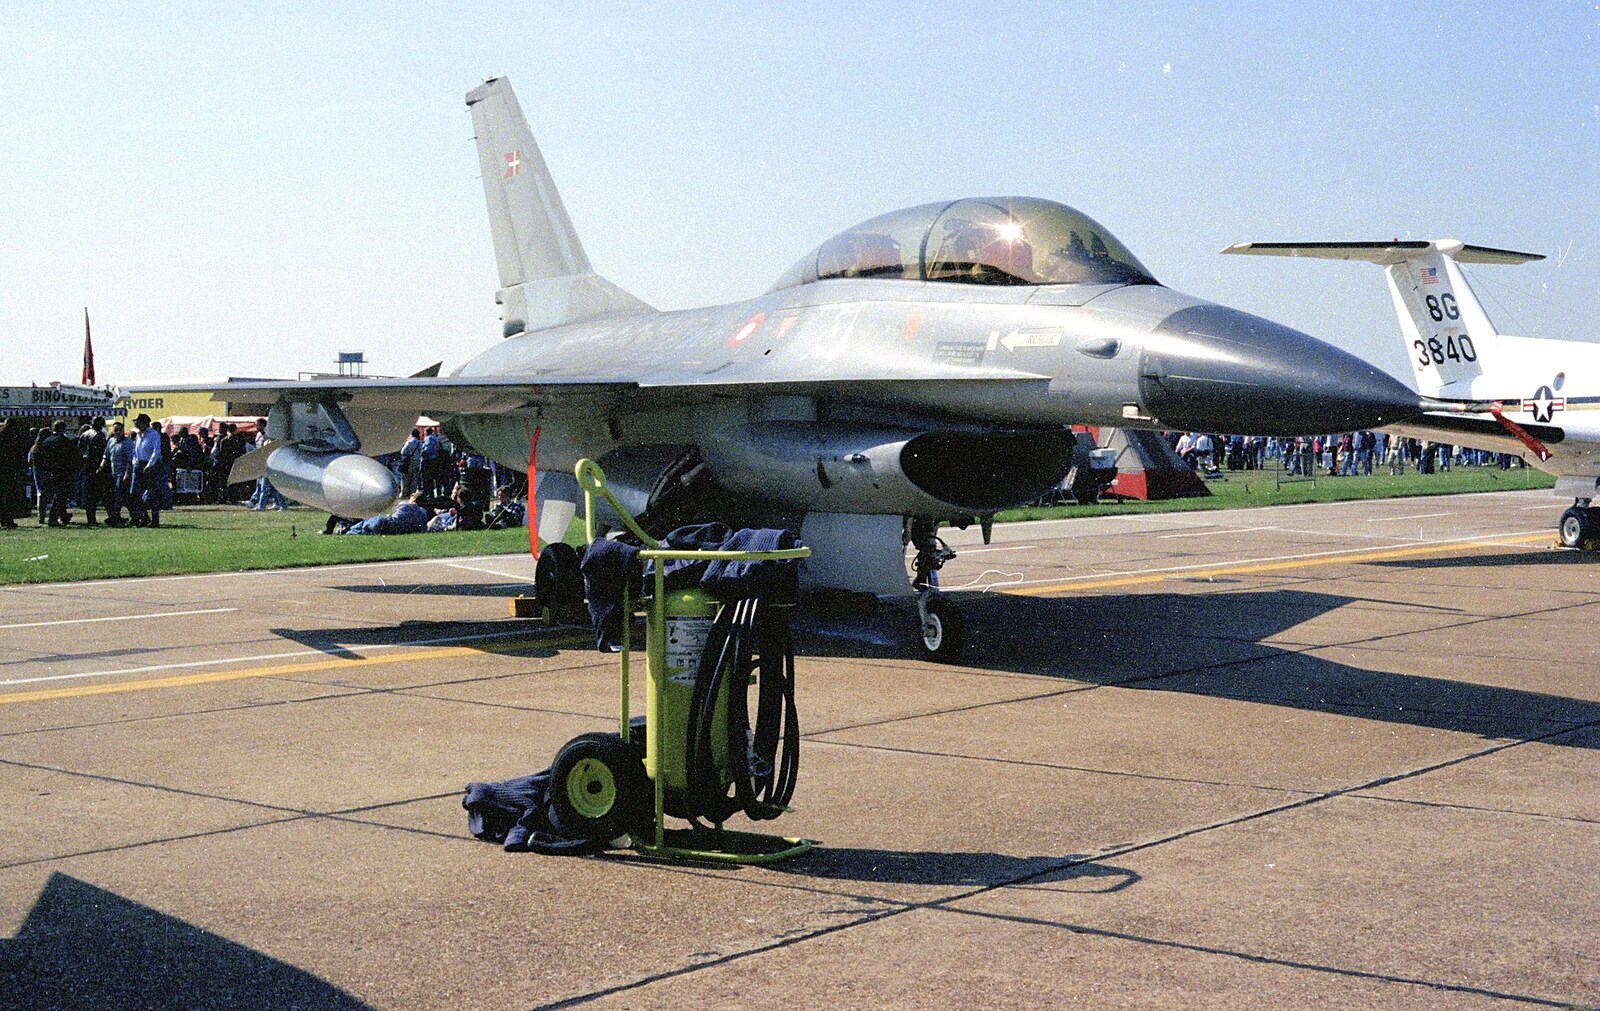 Another F-18 from The Mildenhall Air Fete, Mildenhall, Suffolk - 29th May 1994